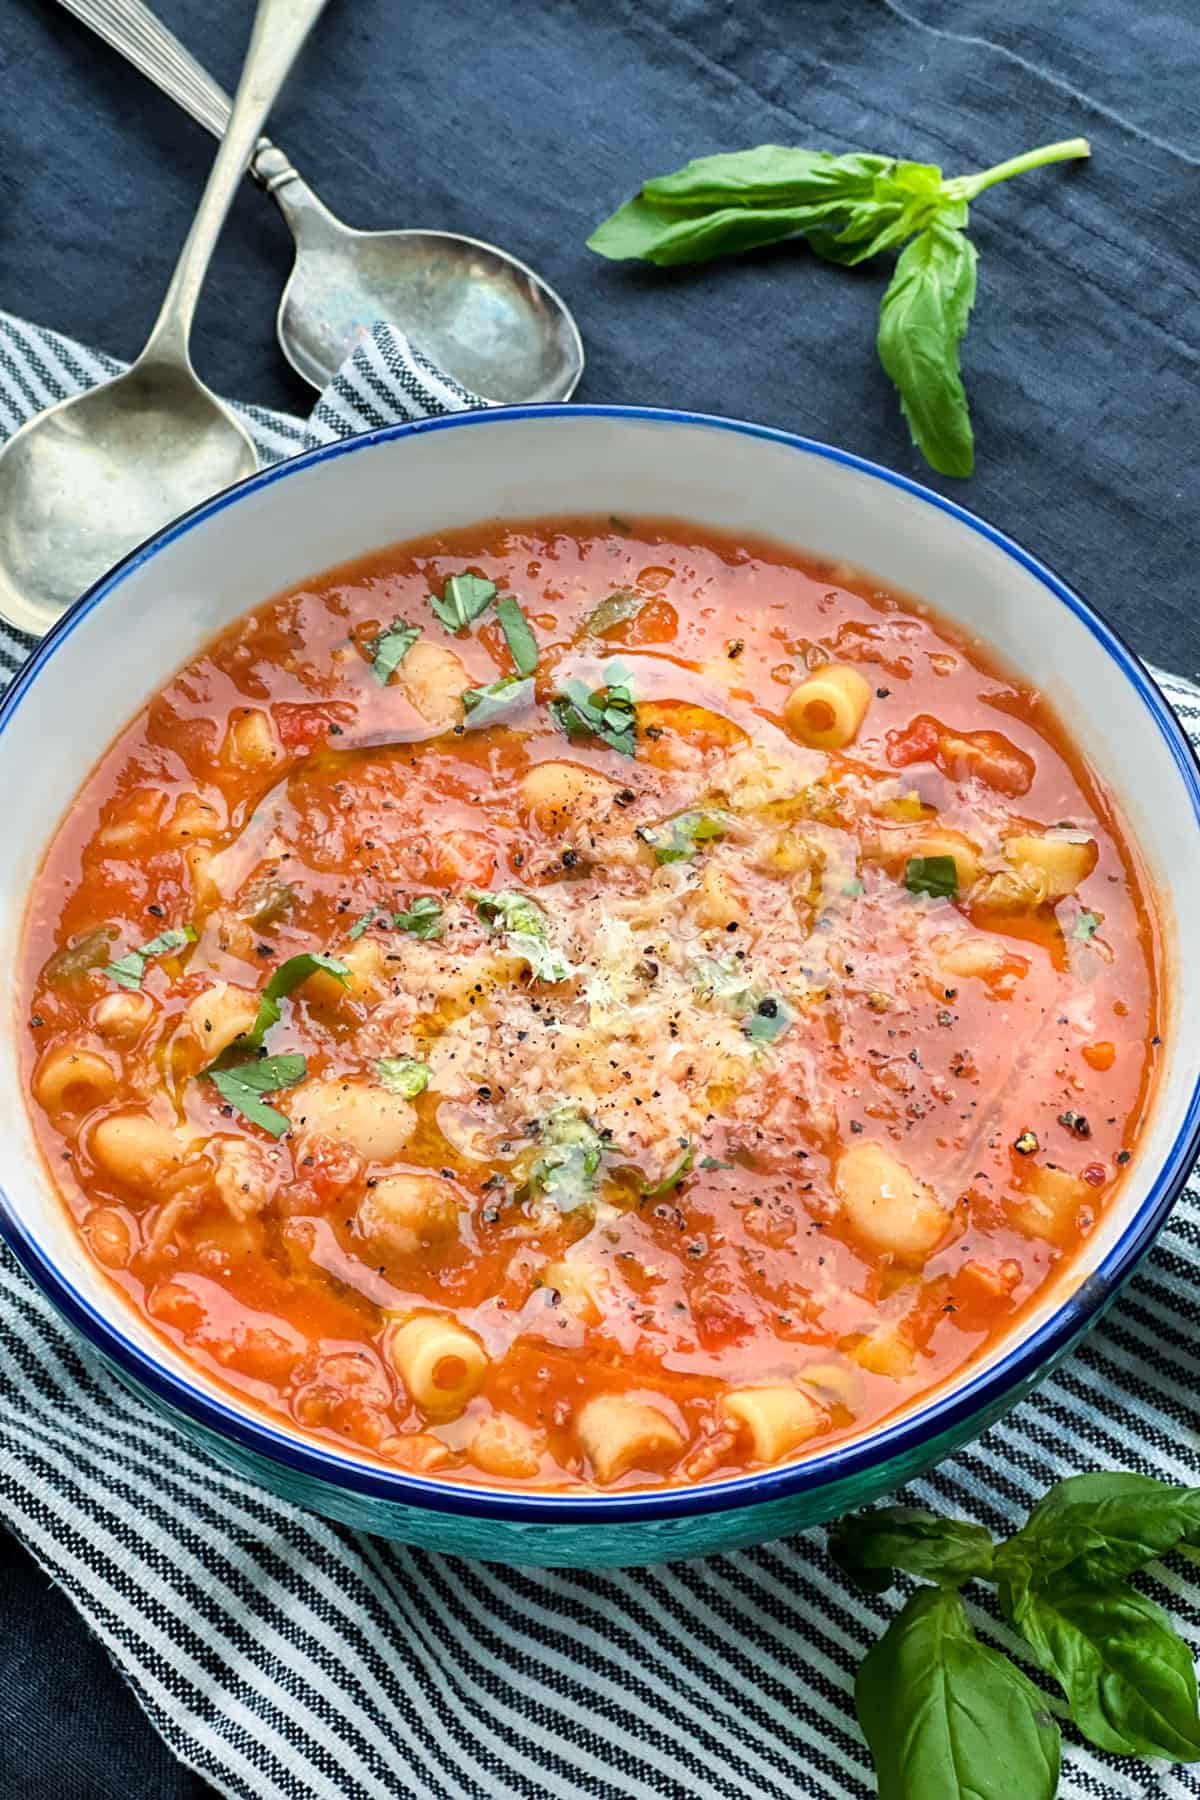 A porcelain bowl filled with pasta e fagioli soup with tiny tubes of pasta and cannellini beans, topped with finely grated parmesan cheese and chopped basil.